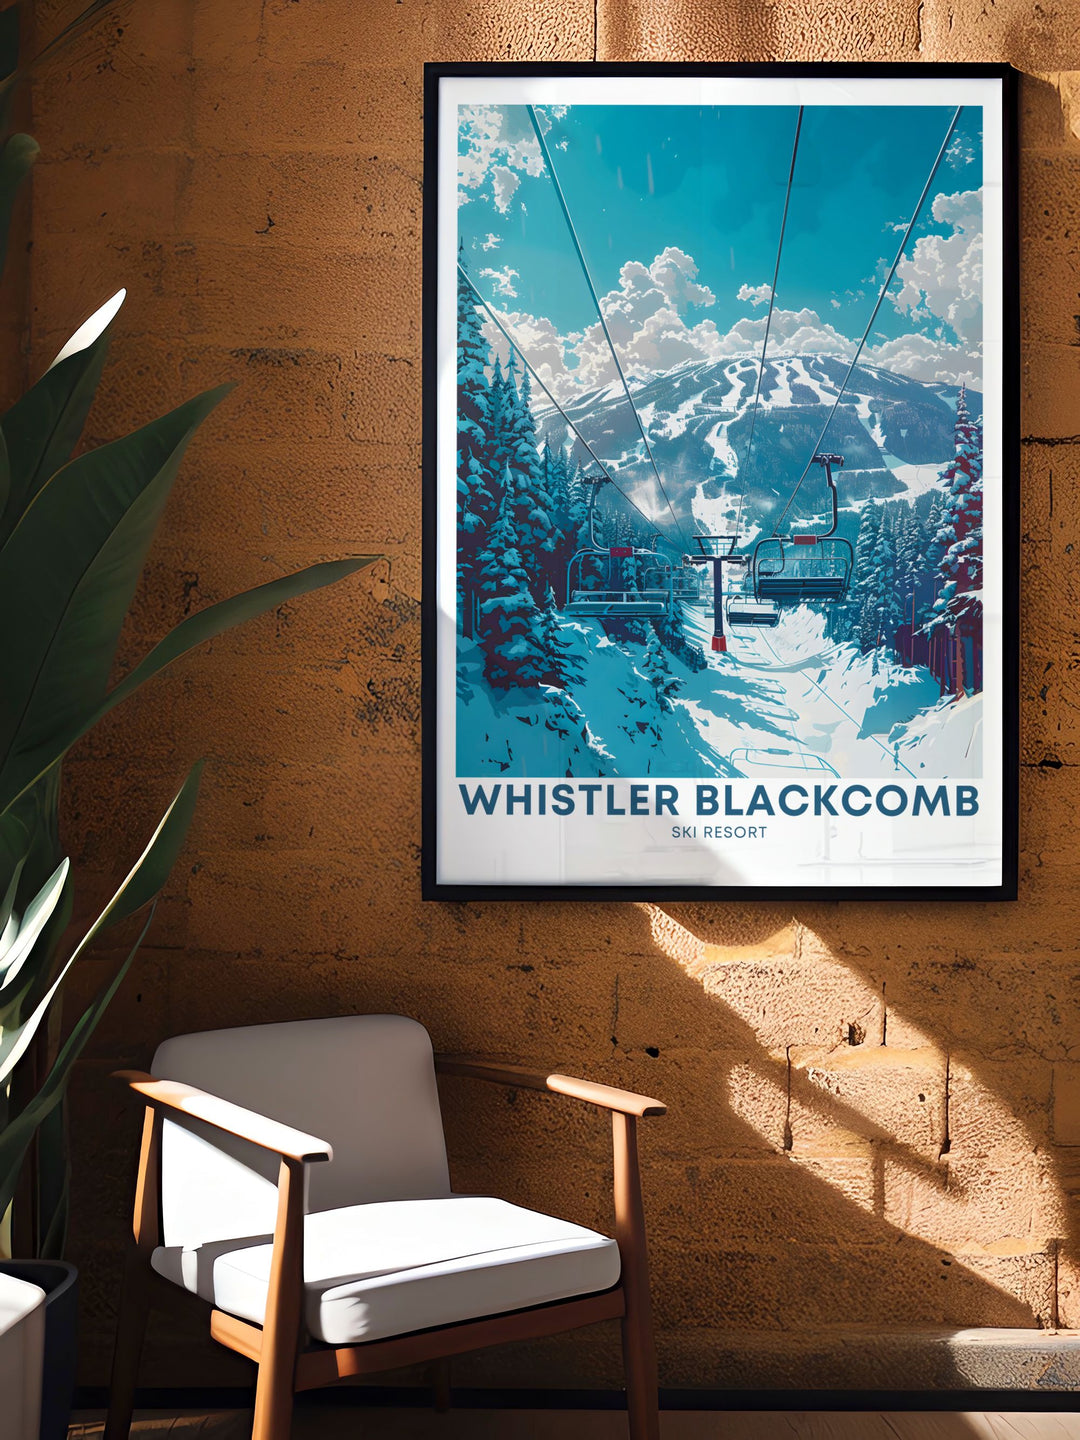 Beautiful Whistler peak chair lifts vintage print highlighting the classic charm of Whistler Blackcomb, perfect for adding a touch of nostalgia and adventure to your living space or office.